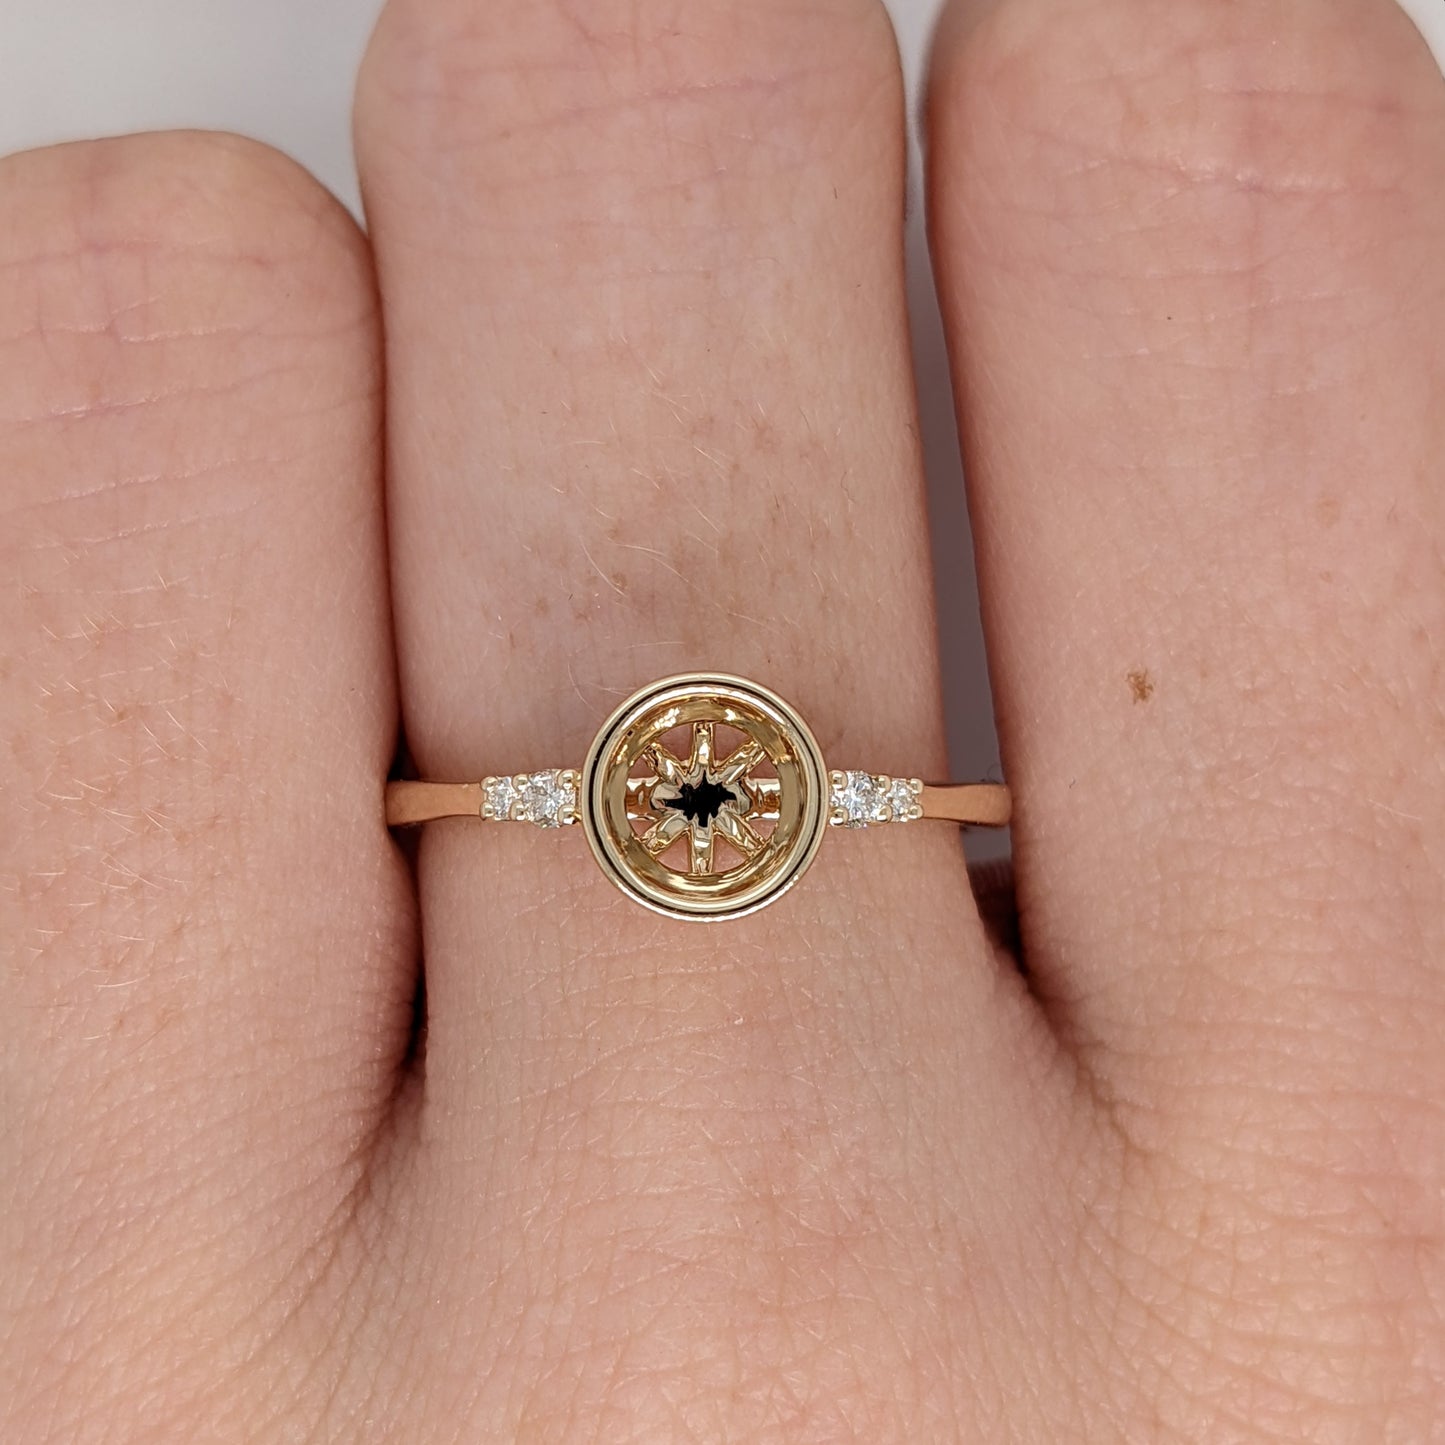 Bezel Ring Semi Mount in Solid 14k Gold with Natural Diamond Accents | Round Cut